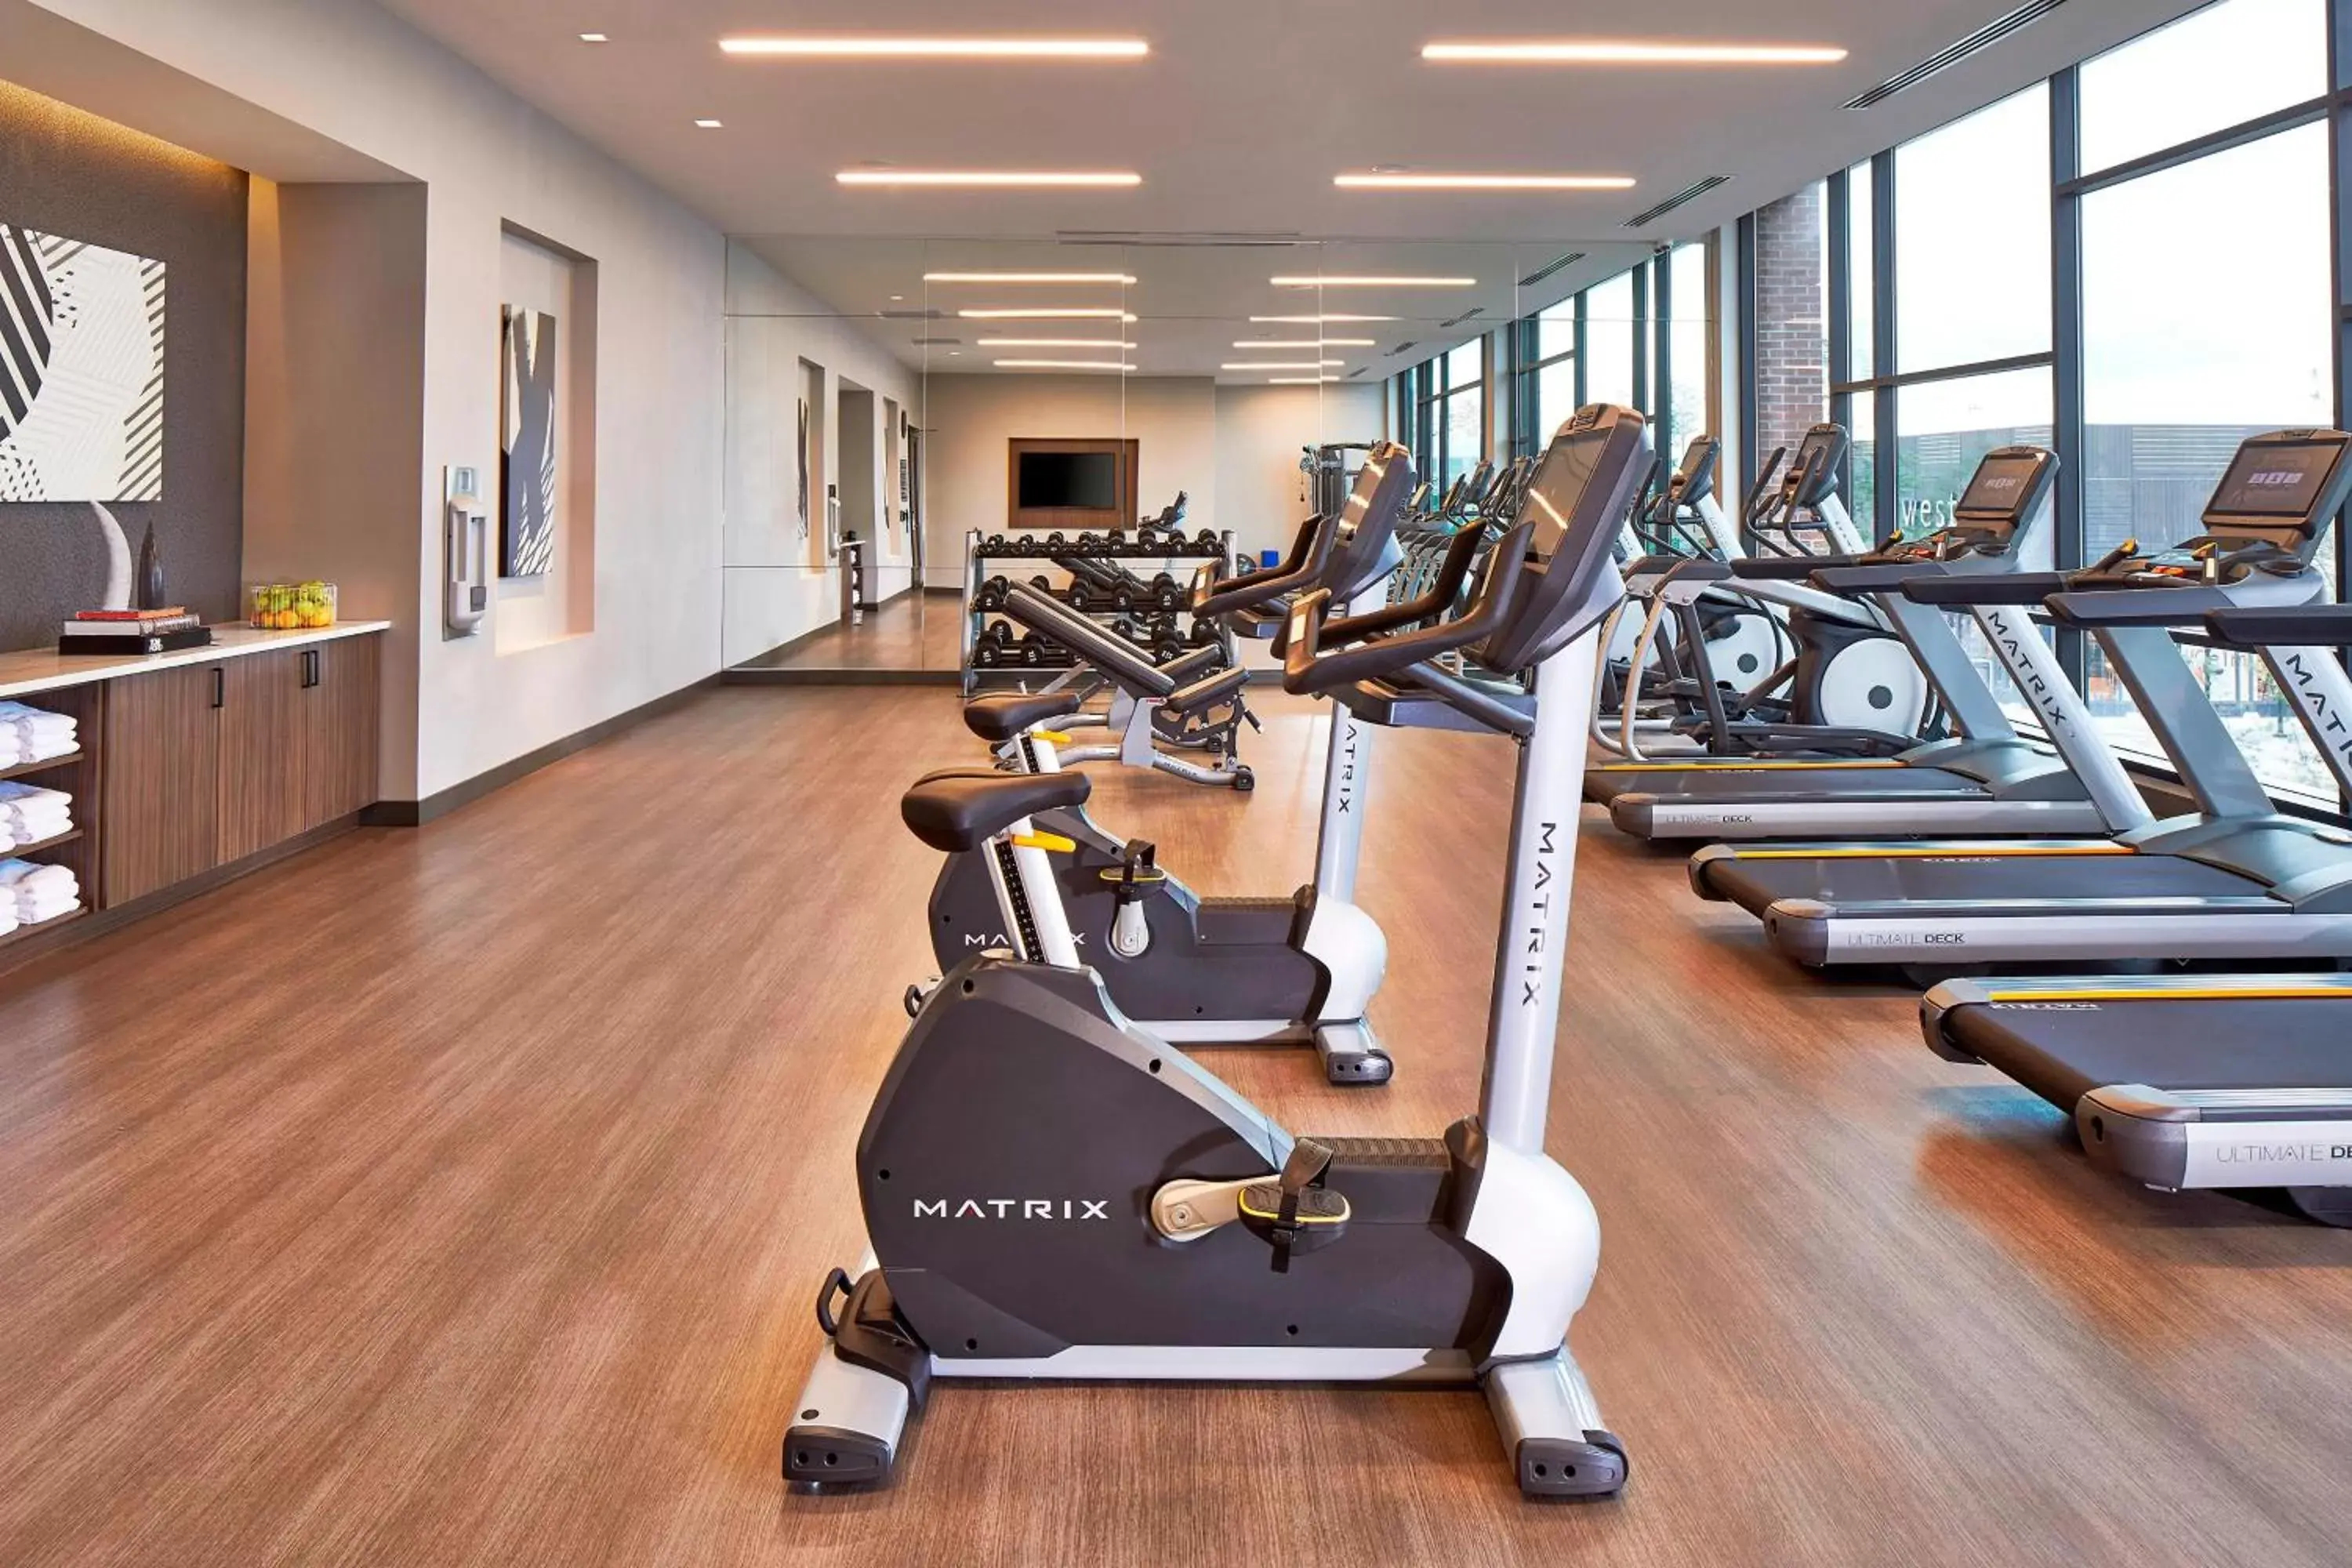 Fitness centre/facilities, Fitness Center/Facilities in AC Hotel by Marriott Cleveland Beachwood